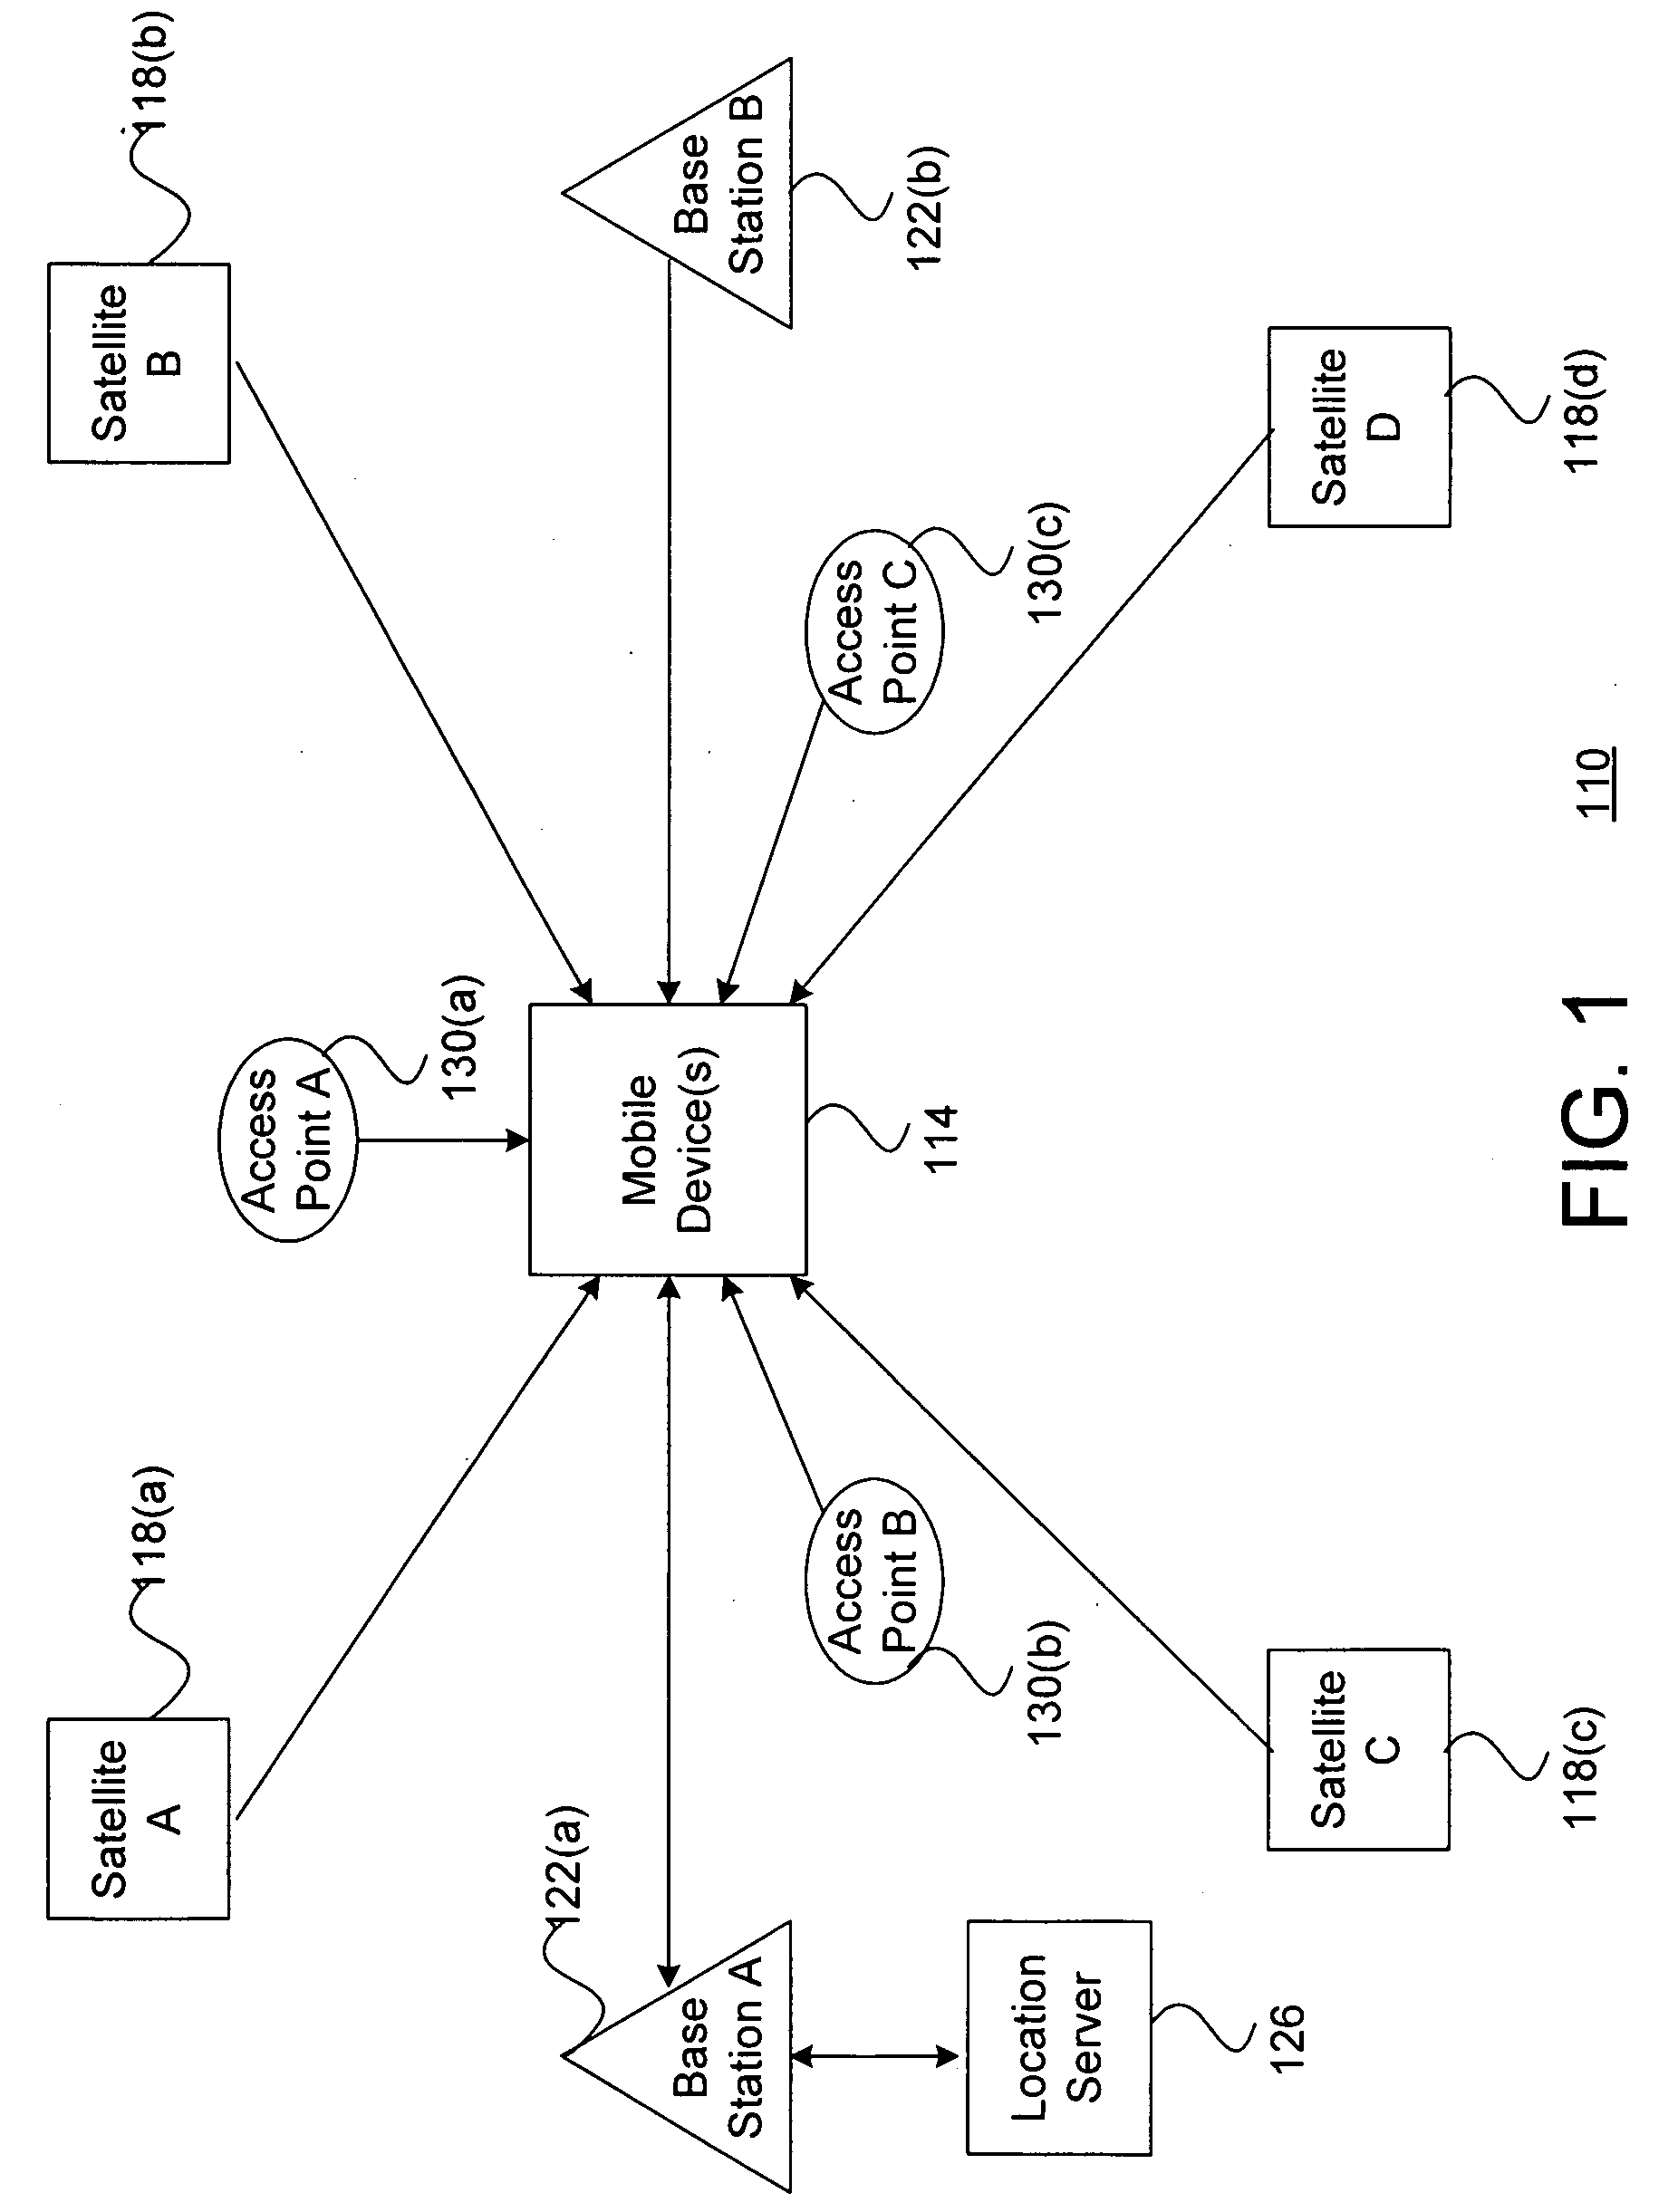 System and method for efficiently populating an access point database